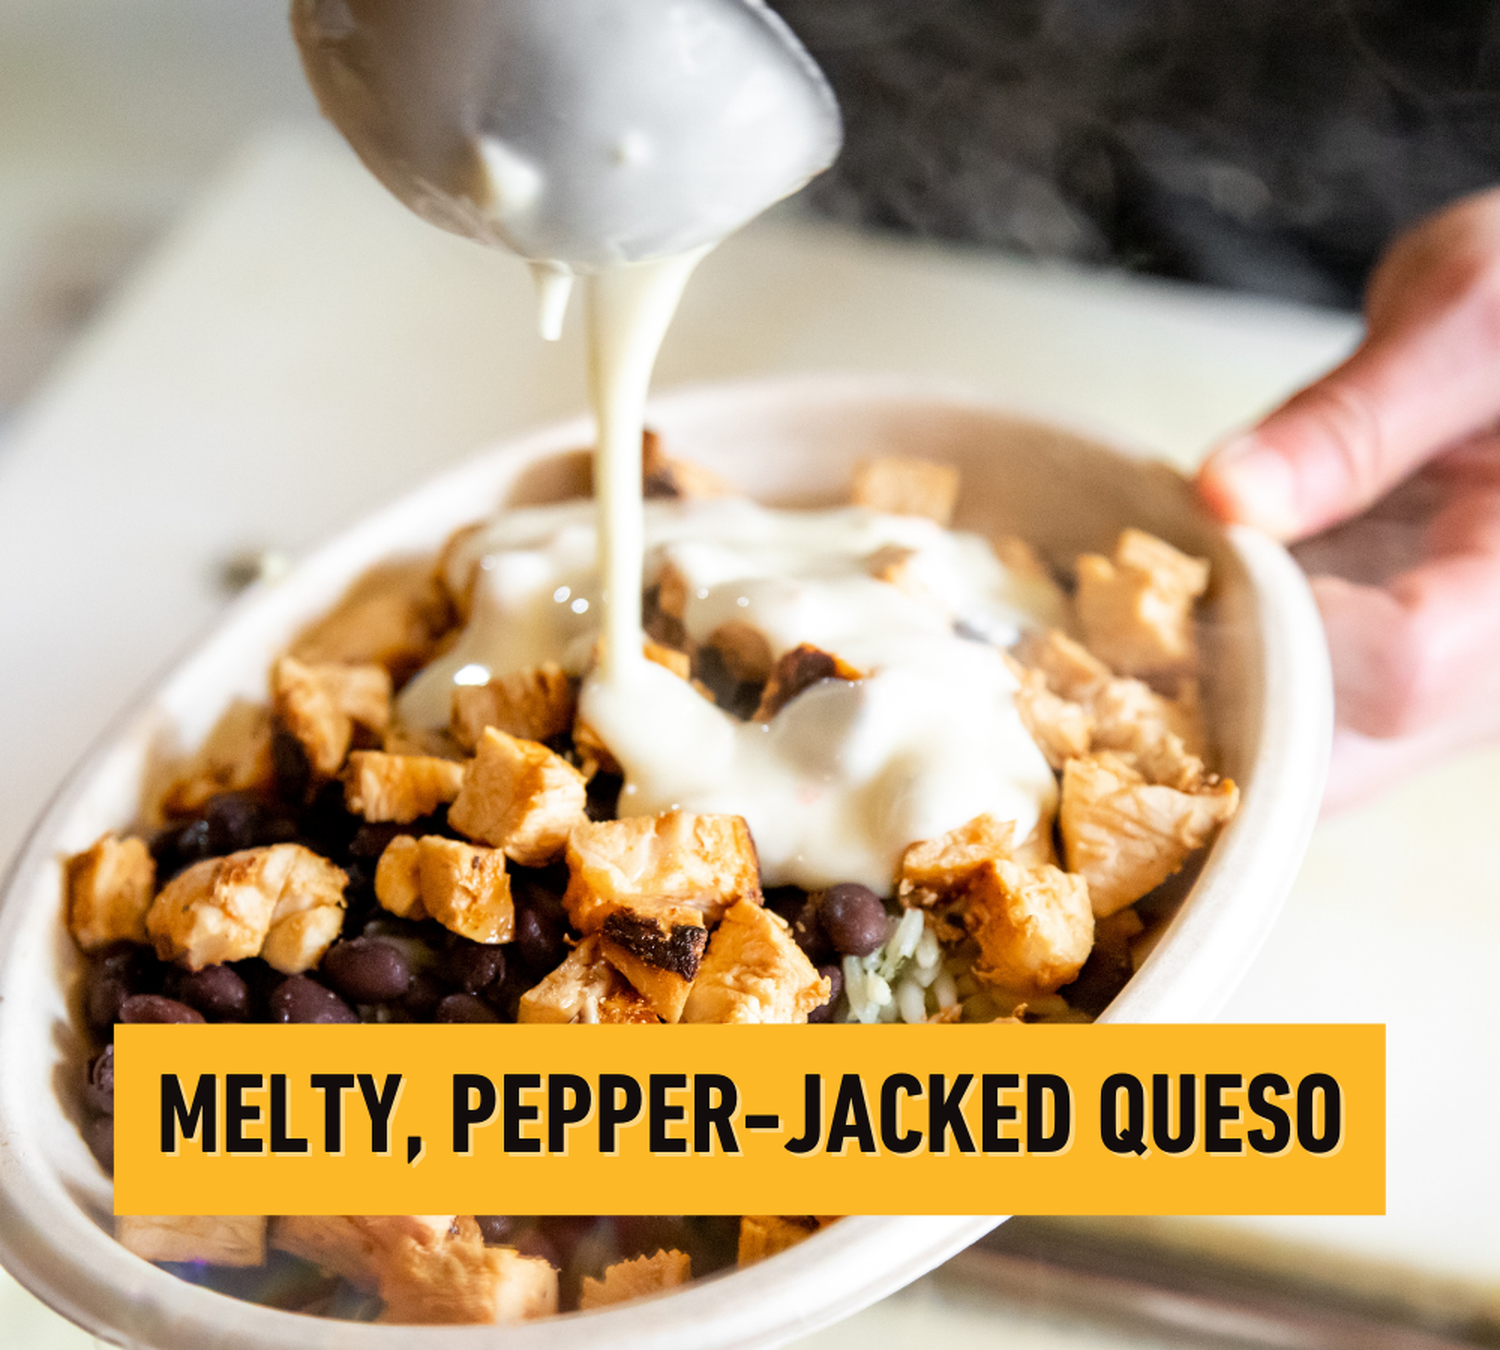 melty, pepper-jacked queso